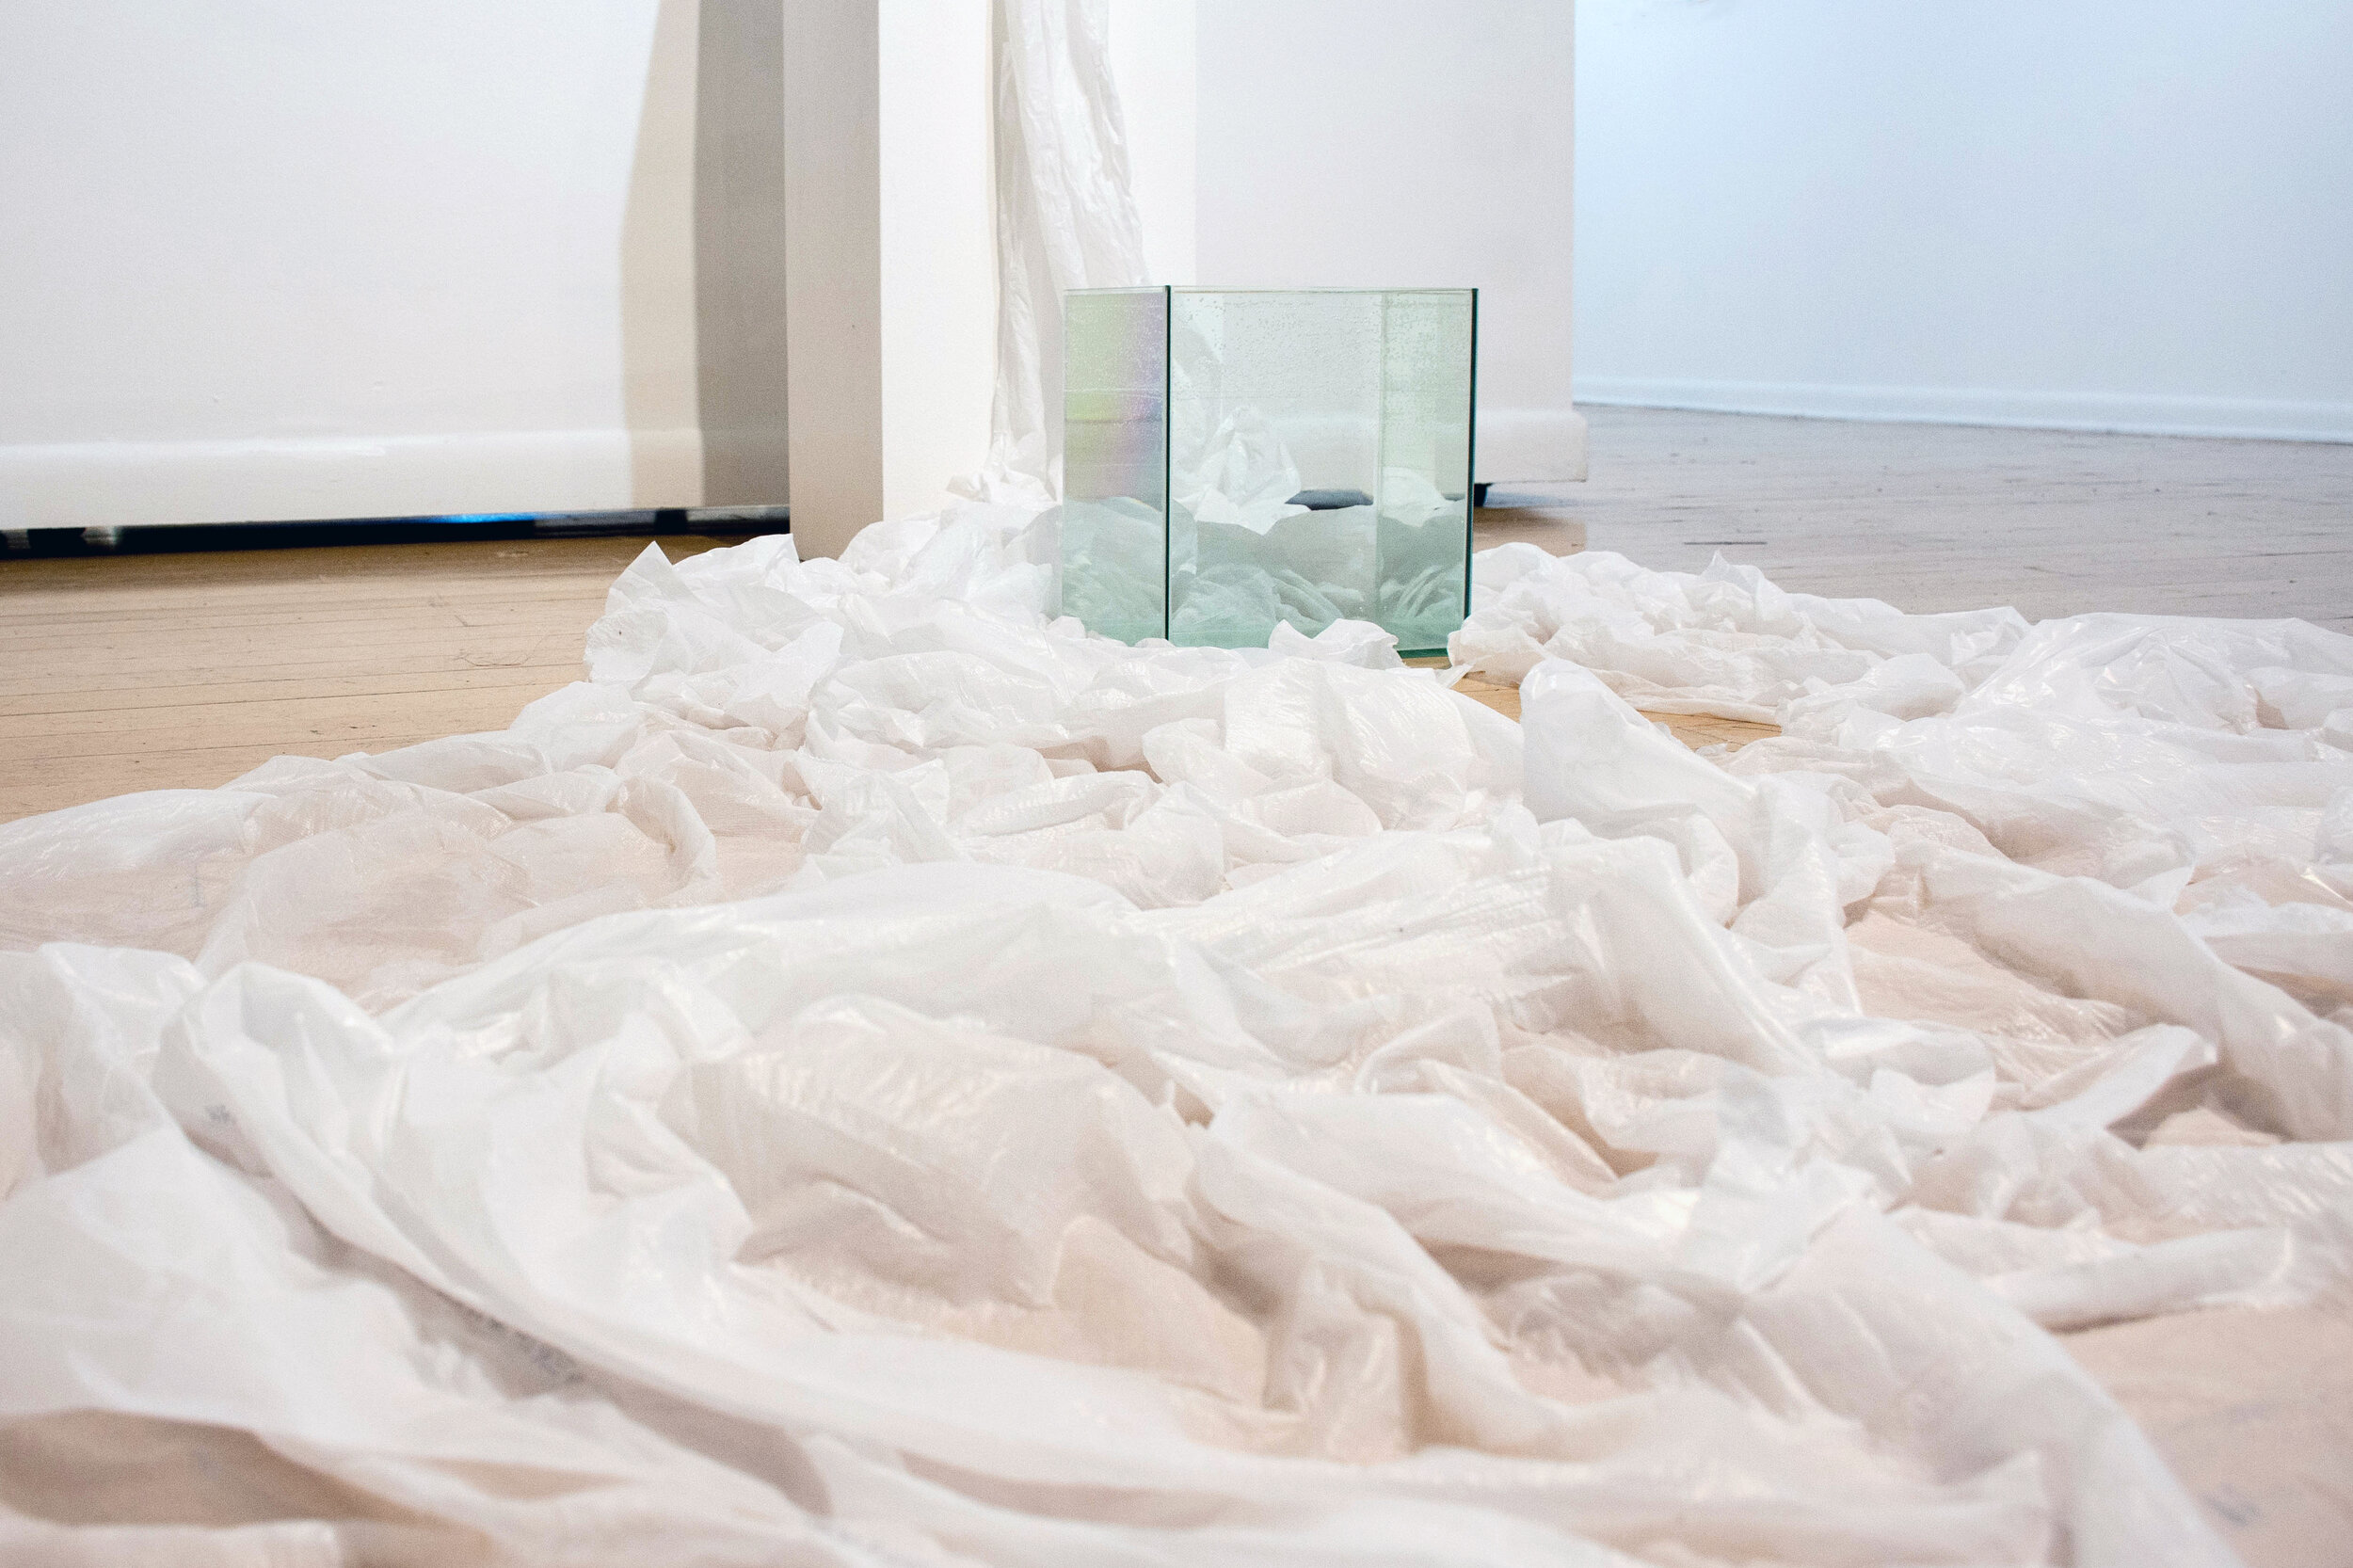  I Deserve to Stay, Dimensions variable, Water Tank &amp; Plastic Bags &amp; Water, 2018 